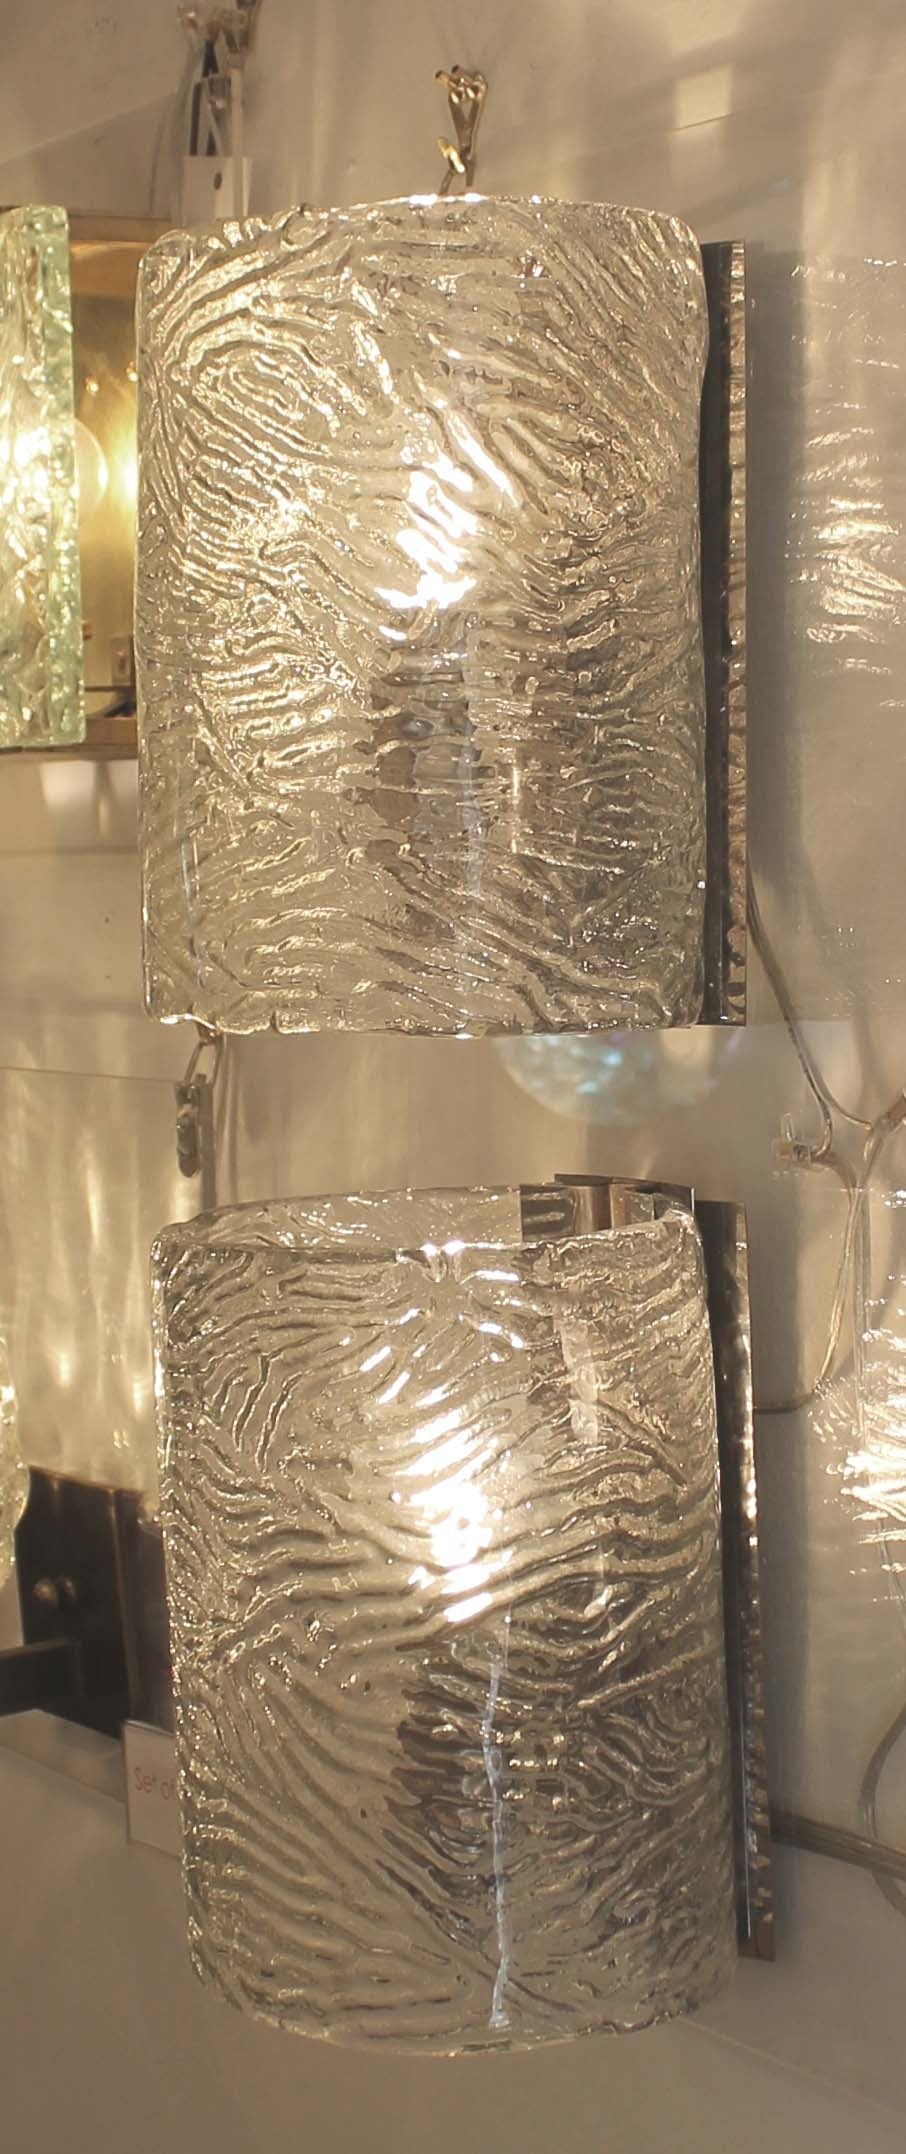 Pair of large cylindrical sconces featuring Murano handblown in a mold glass. The glass is clear and textured on the inside. The hardware is chrome and holds one regular E27 socket.